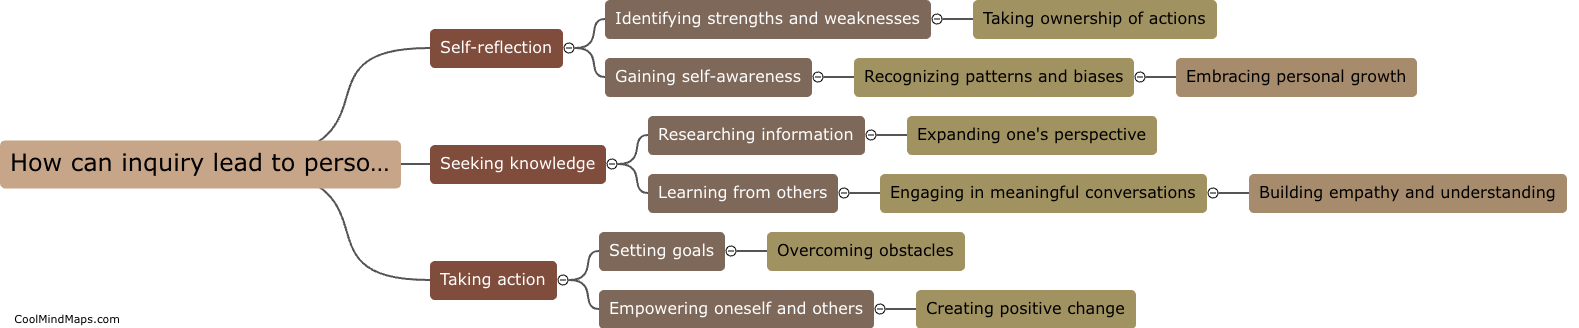 How can inquiry lead to personal empowerment?